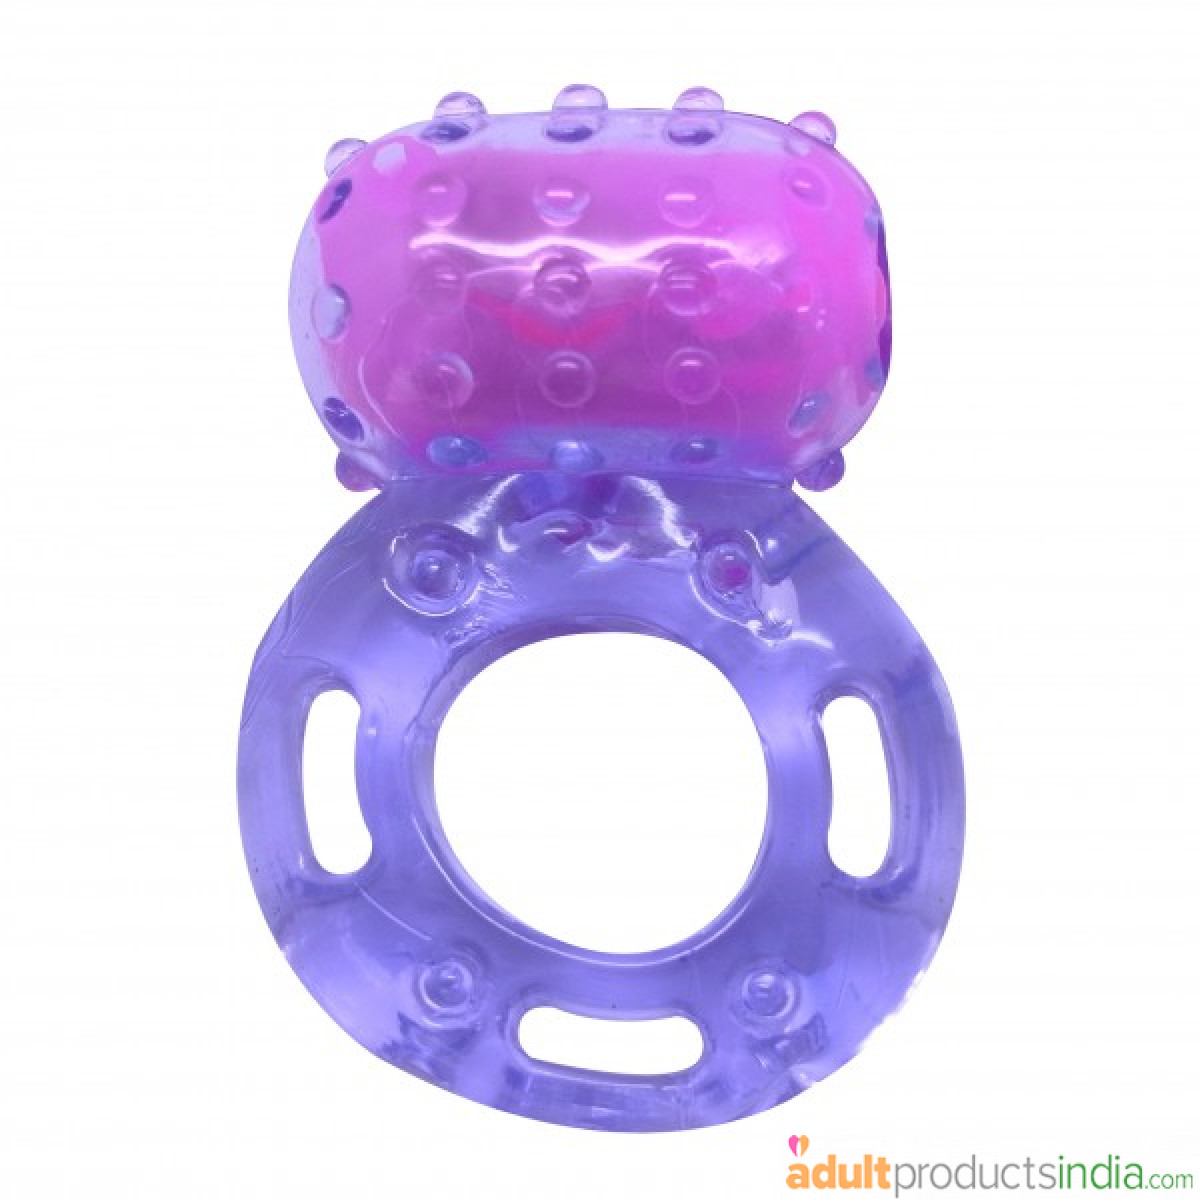 Dotted Single Speed Vibrating Cock Ring